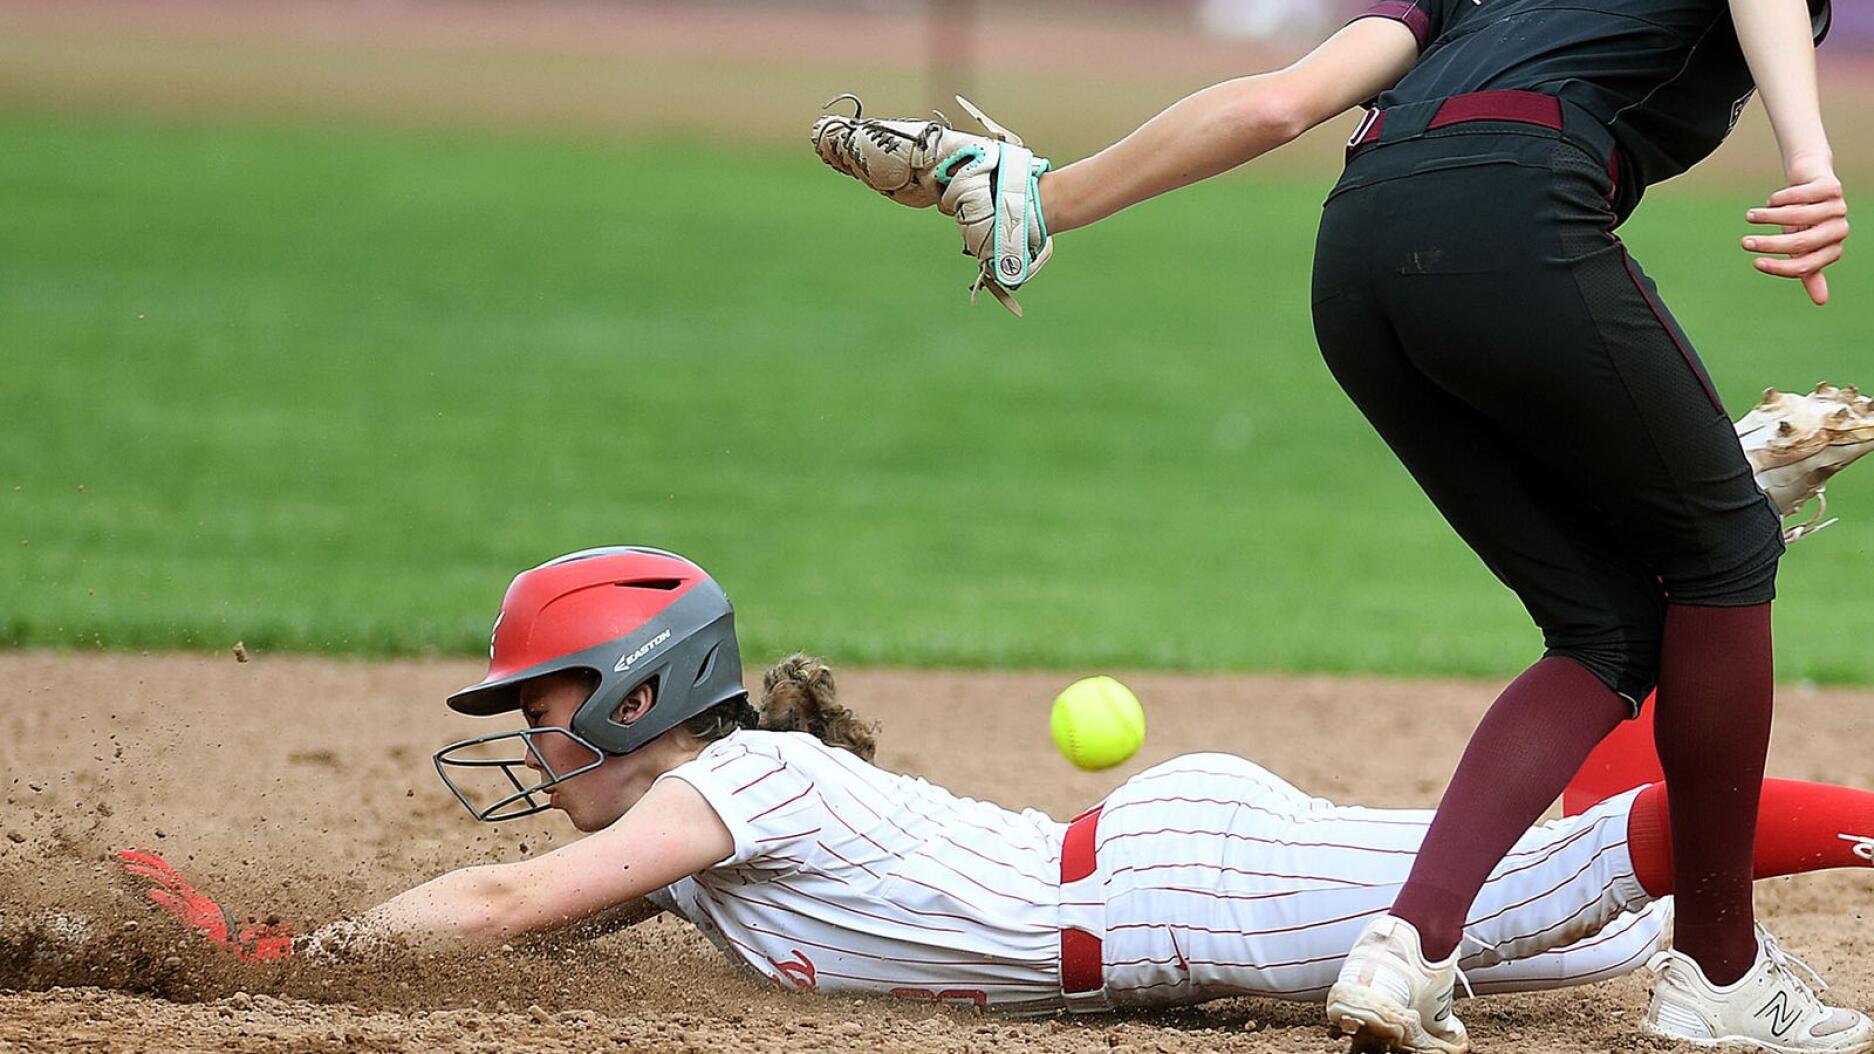 NFA softball turns an early lead into win over East Lyme